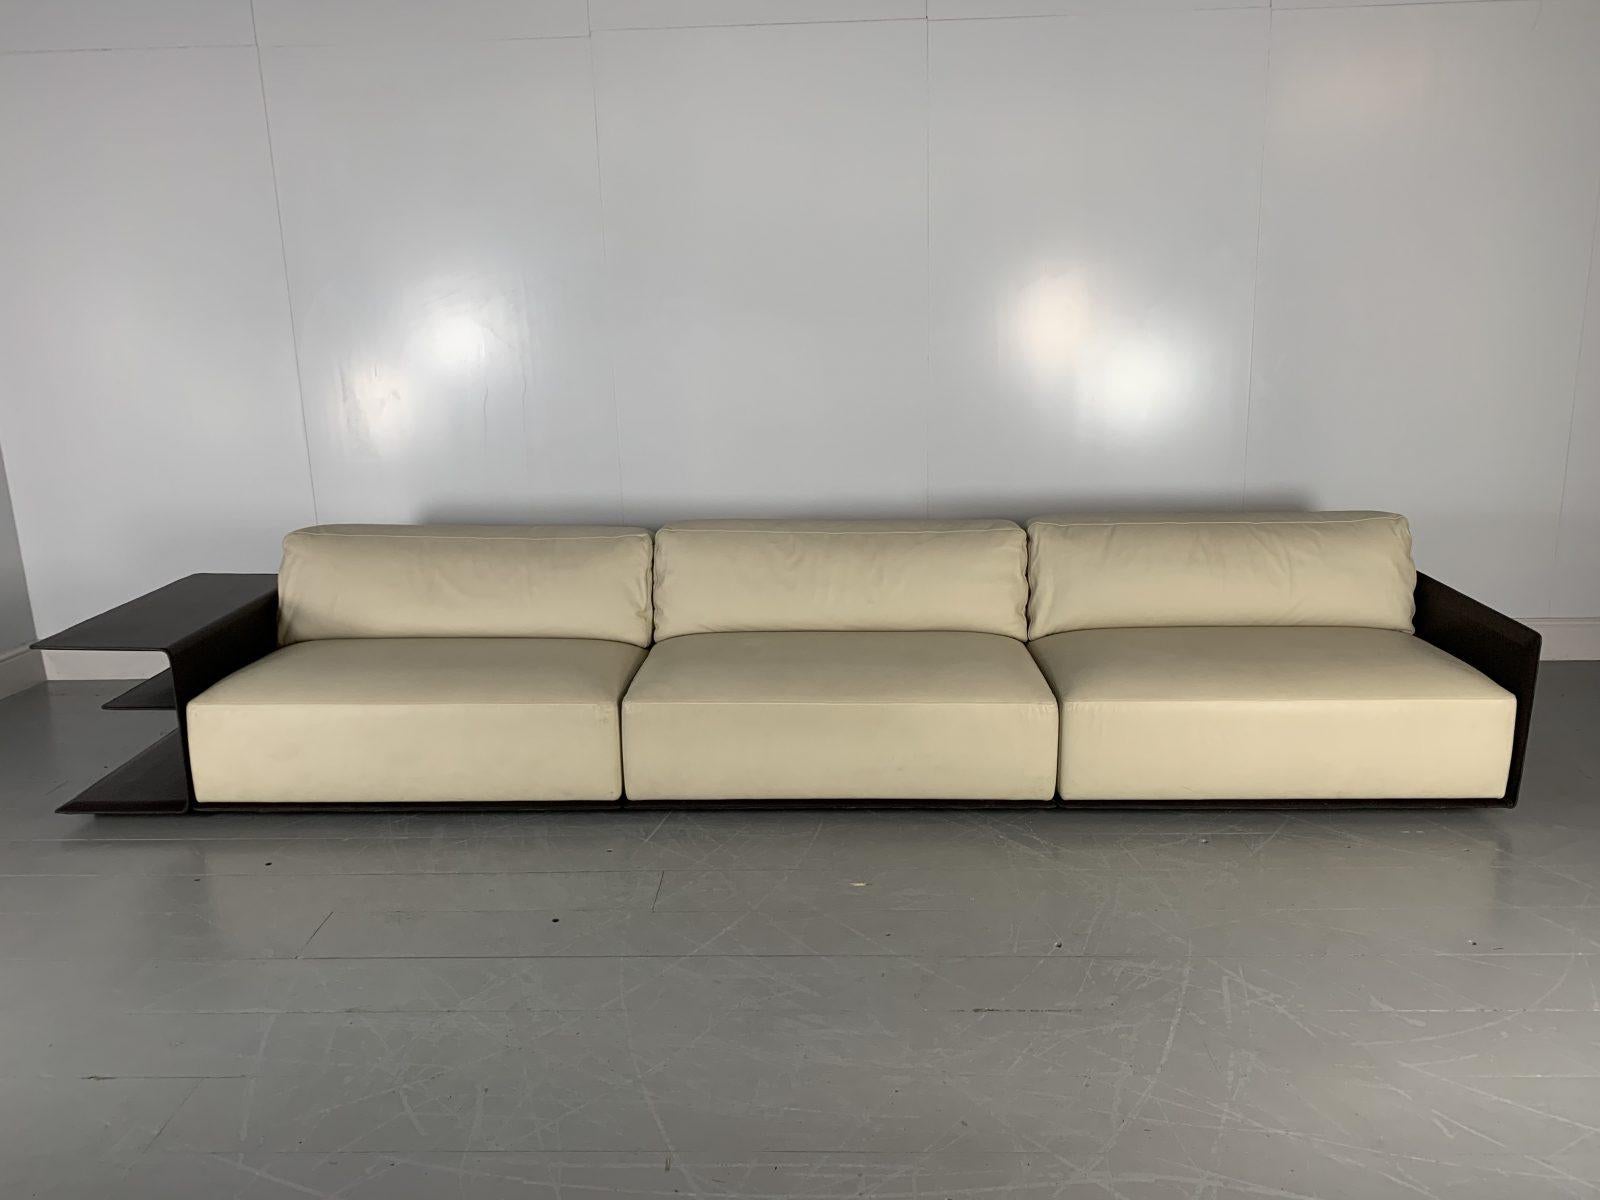 On offer on this occasion is superb, immaculately-presented 250 “Met” 3-Seat (but actually seats 3 or 4 people in comfort) Sofa, from the world renown Italian furniture house of Cassina.

As you will no doubt be aware by your interest in this